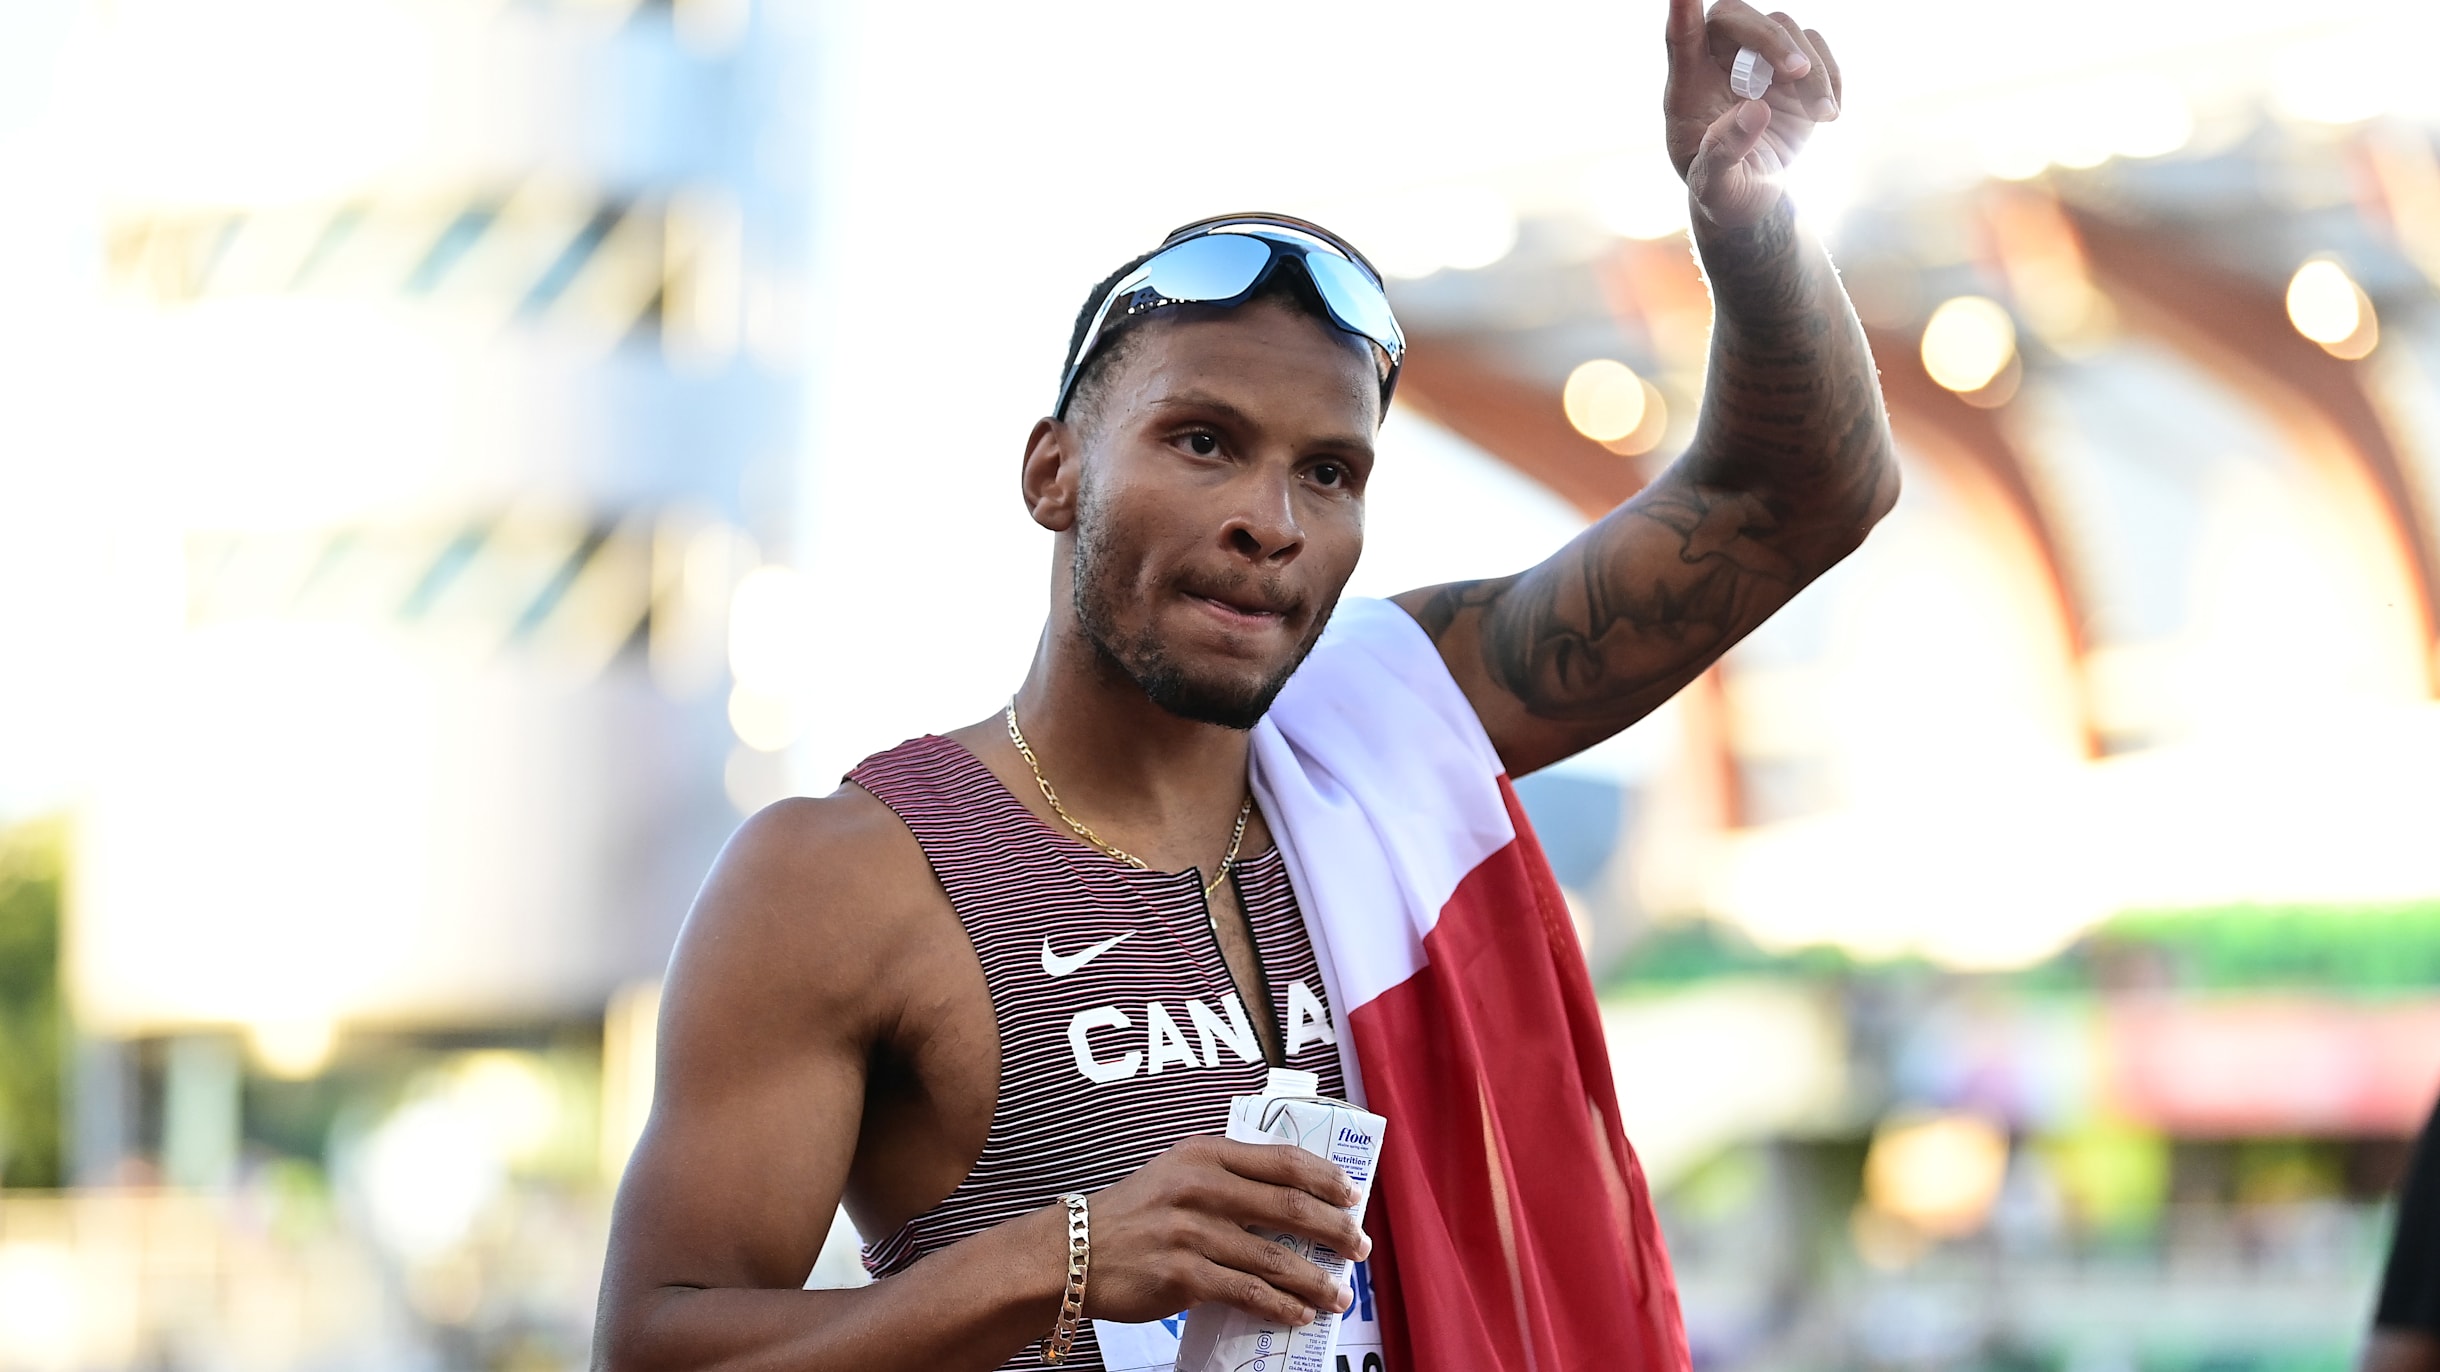 Everything you need to know ahead of Canadian Olympic track and